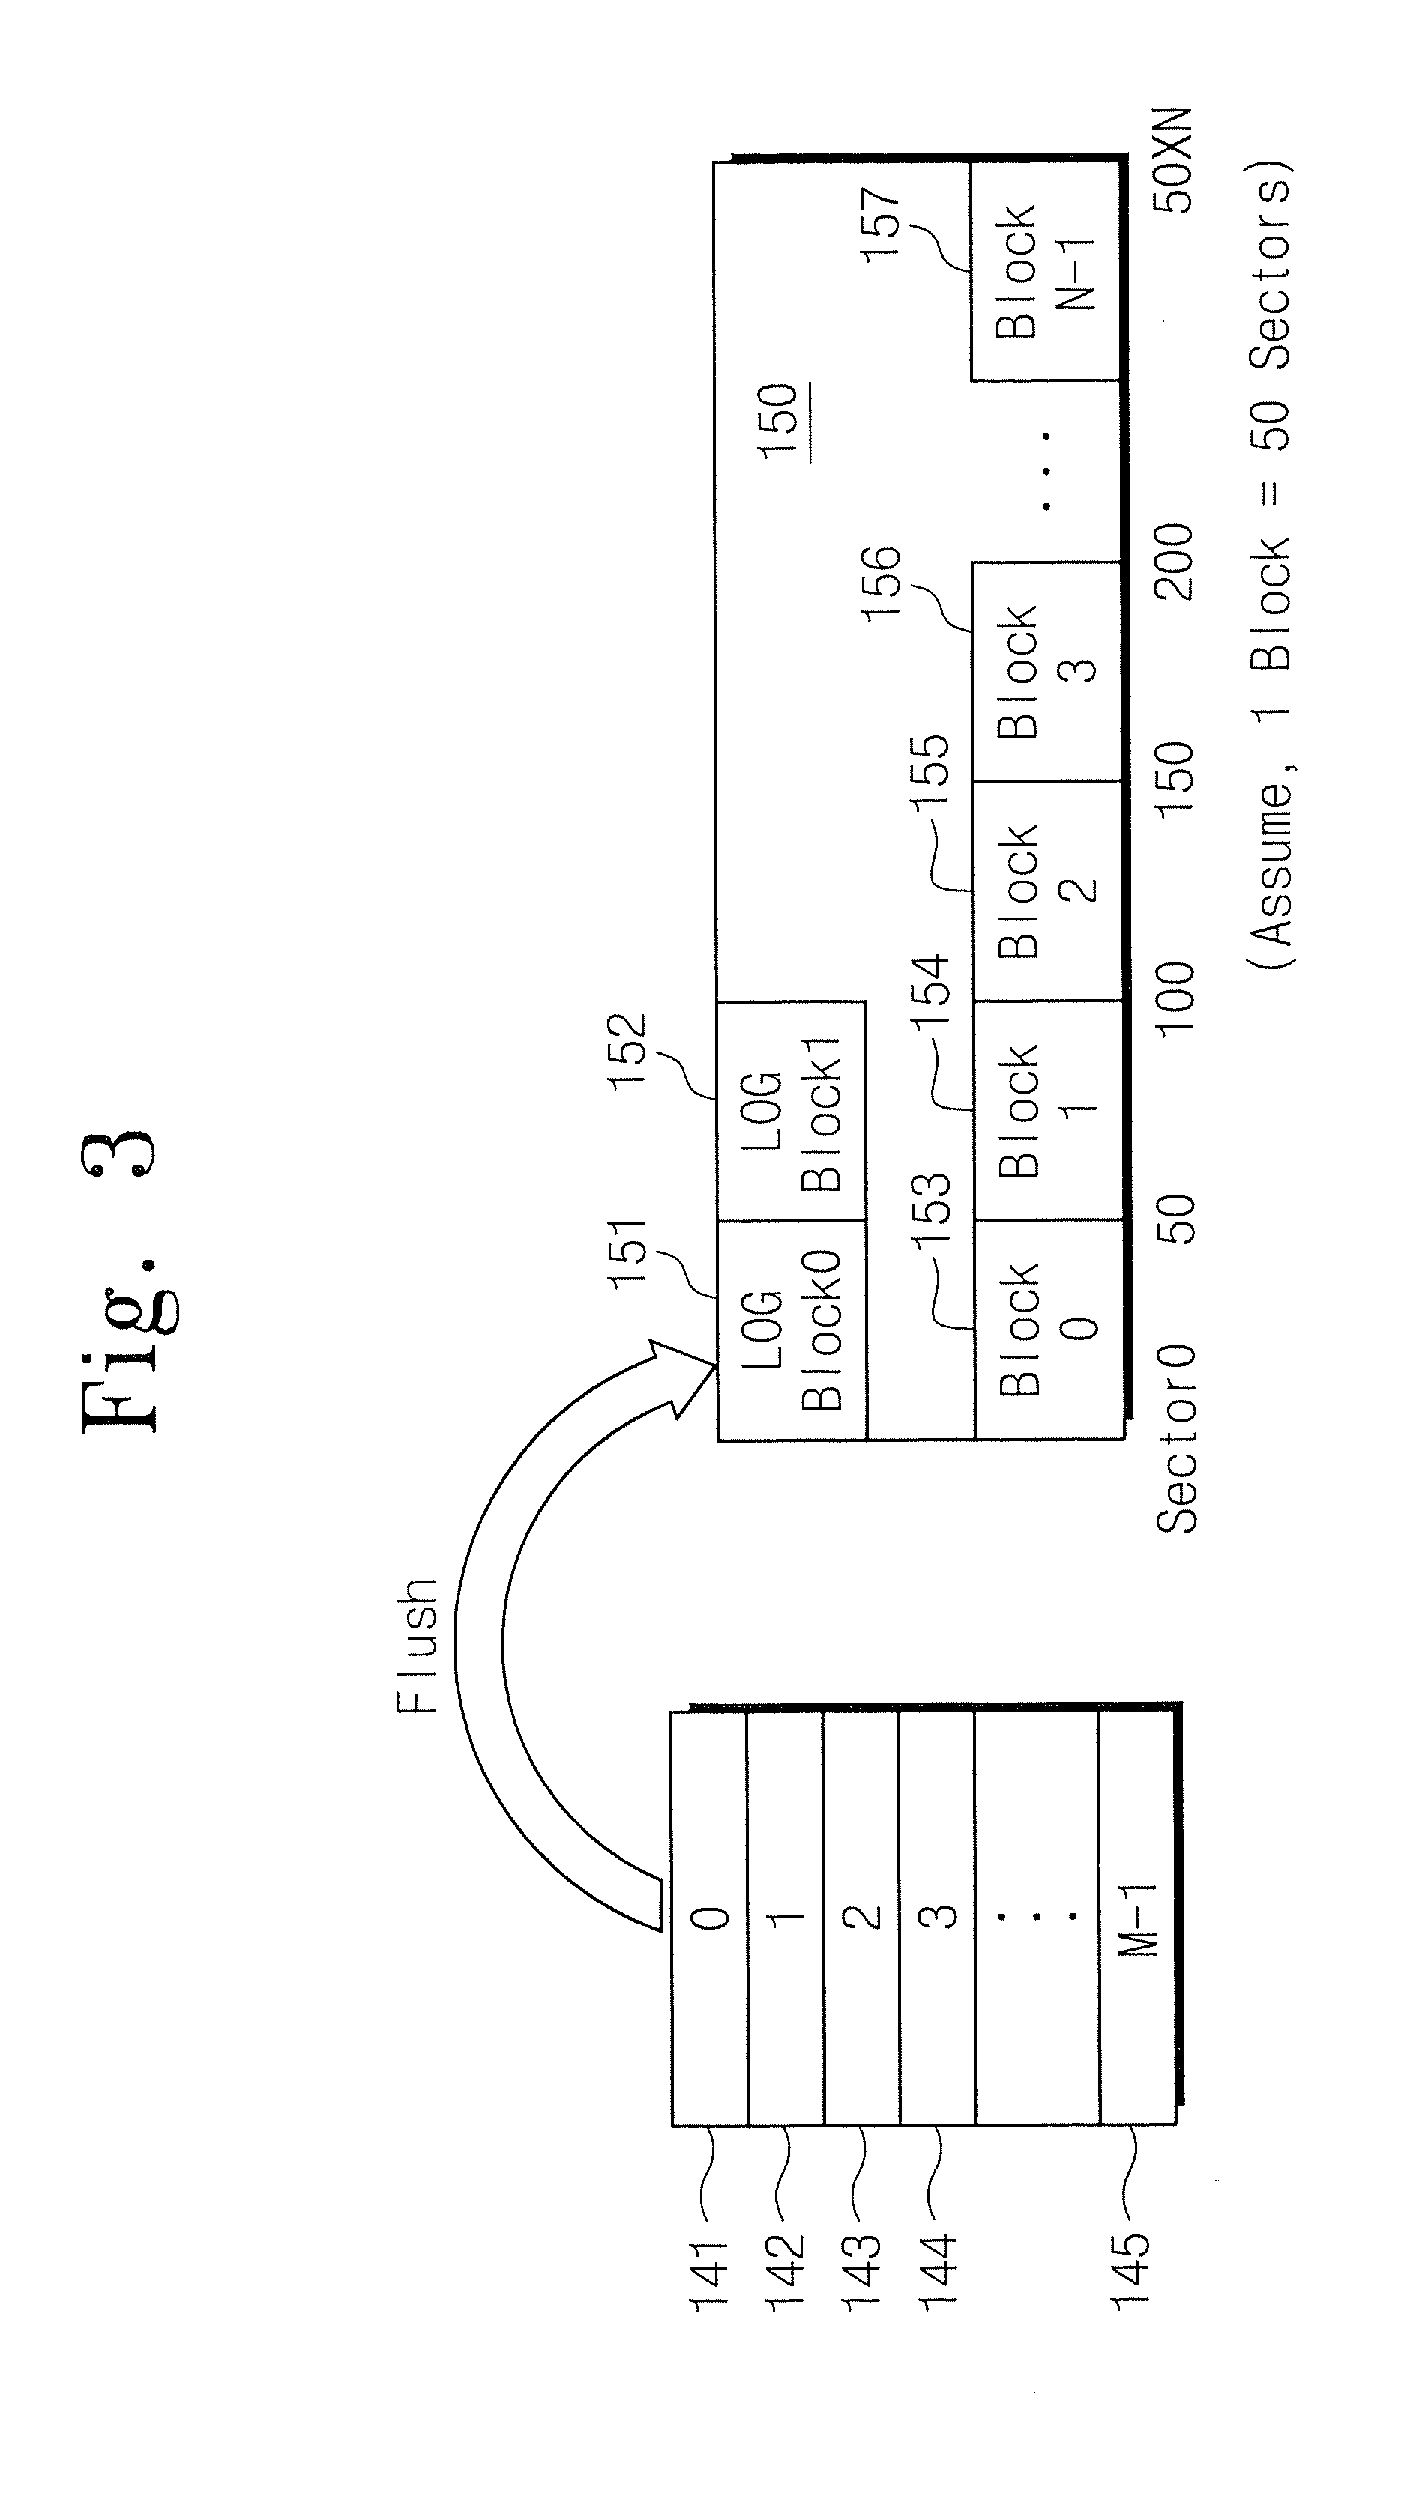 Methods of data management in non-volatile memory devices and related non-volatile memory systems